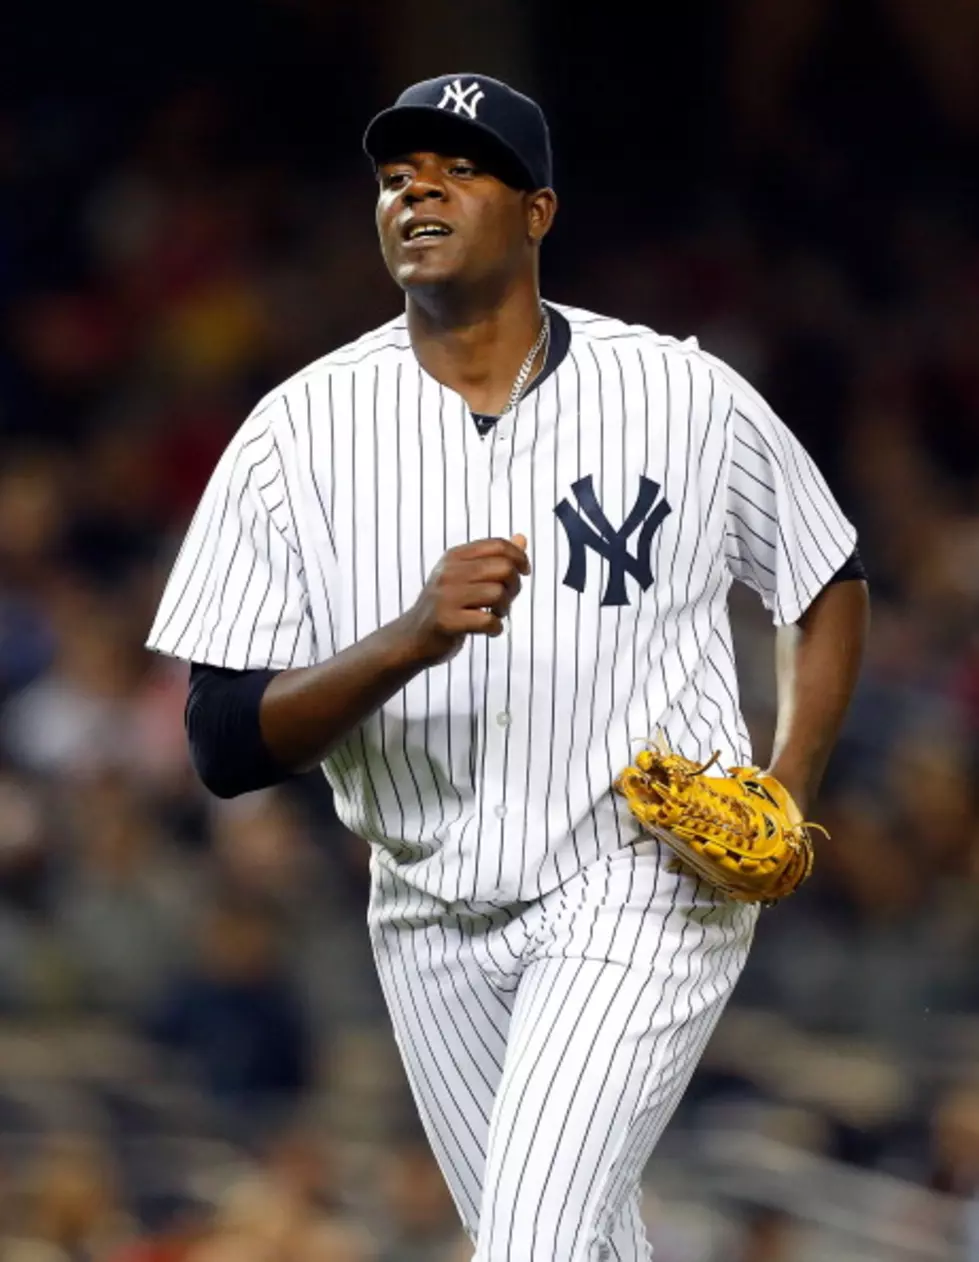 Can Big Mike Keep The Yankees Winning? [PREVIEW]